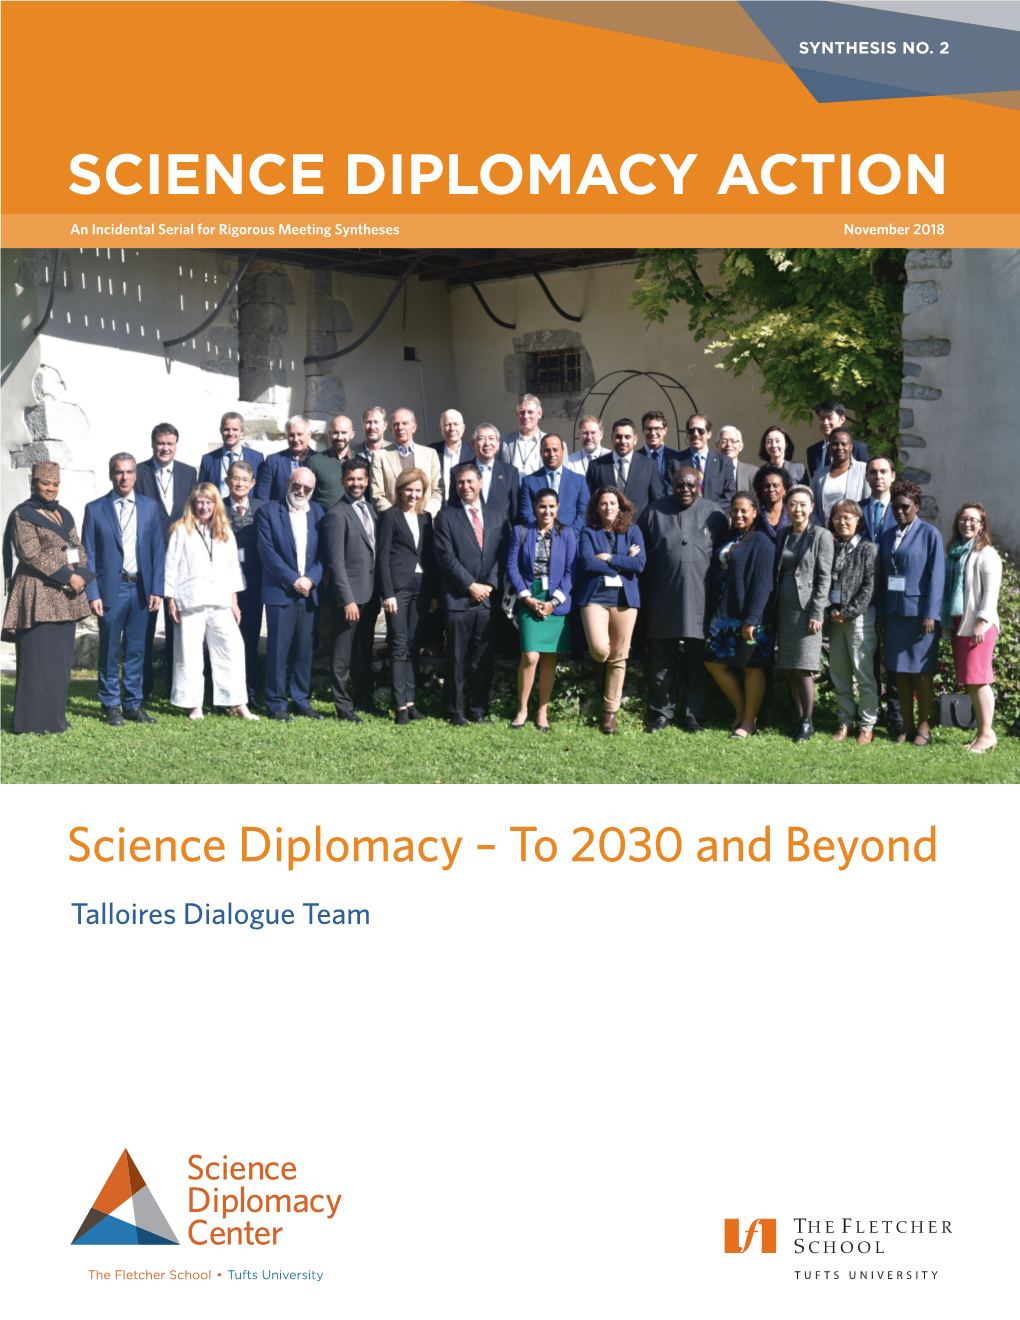 SCIENCE DIPLOMACY ACTION an Incidental Serial for Rigorous Meeting Syntheses November 2018